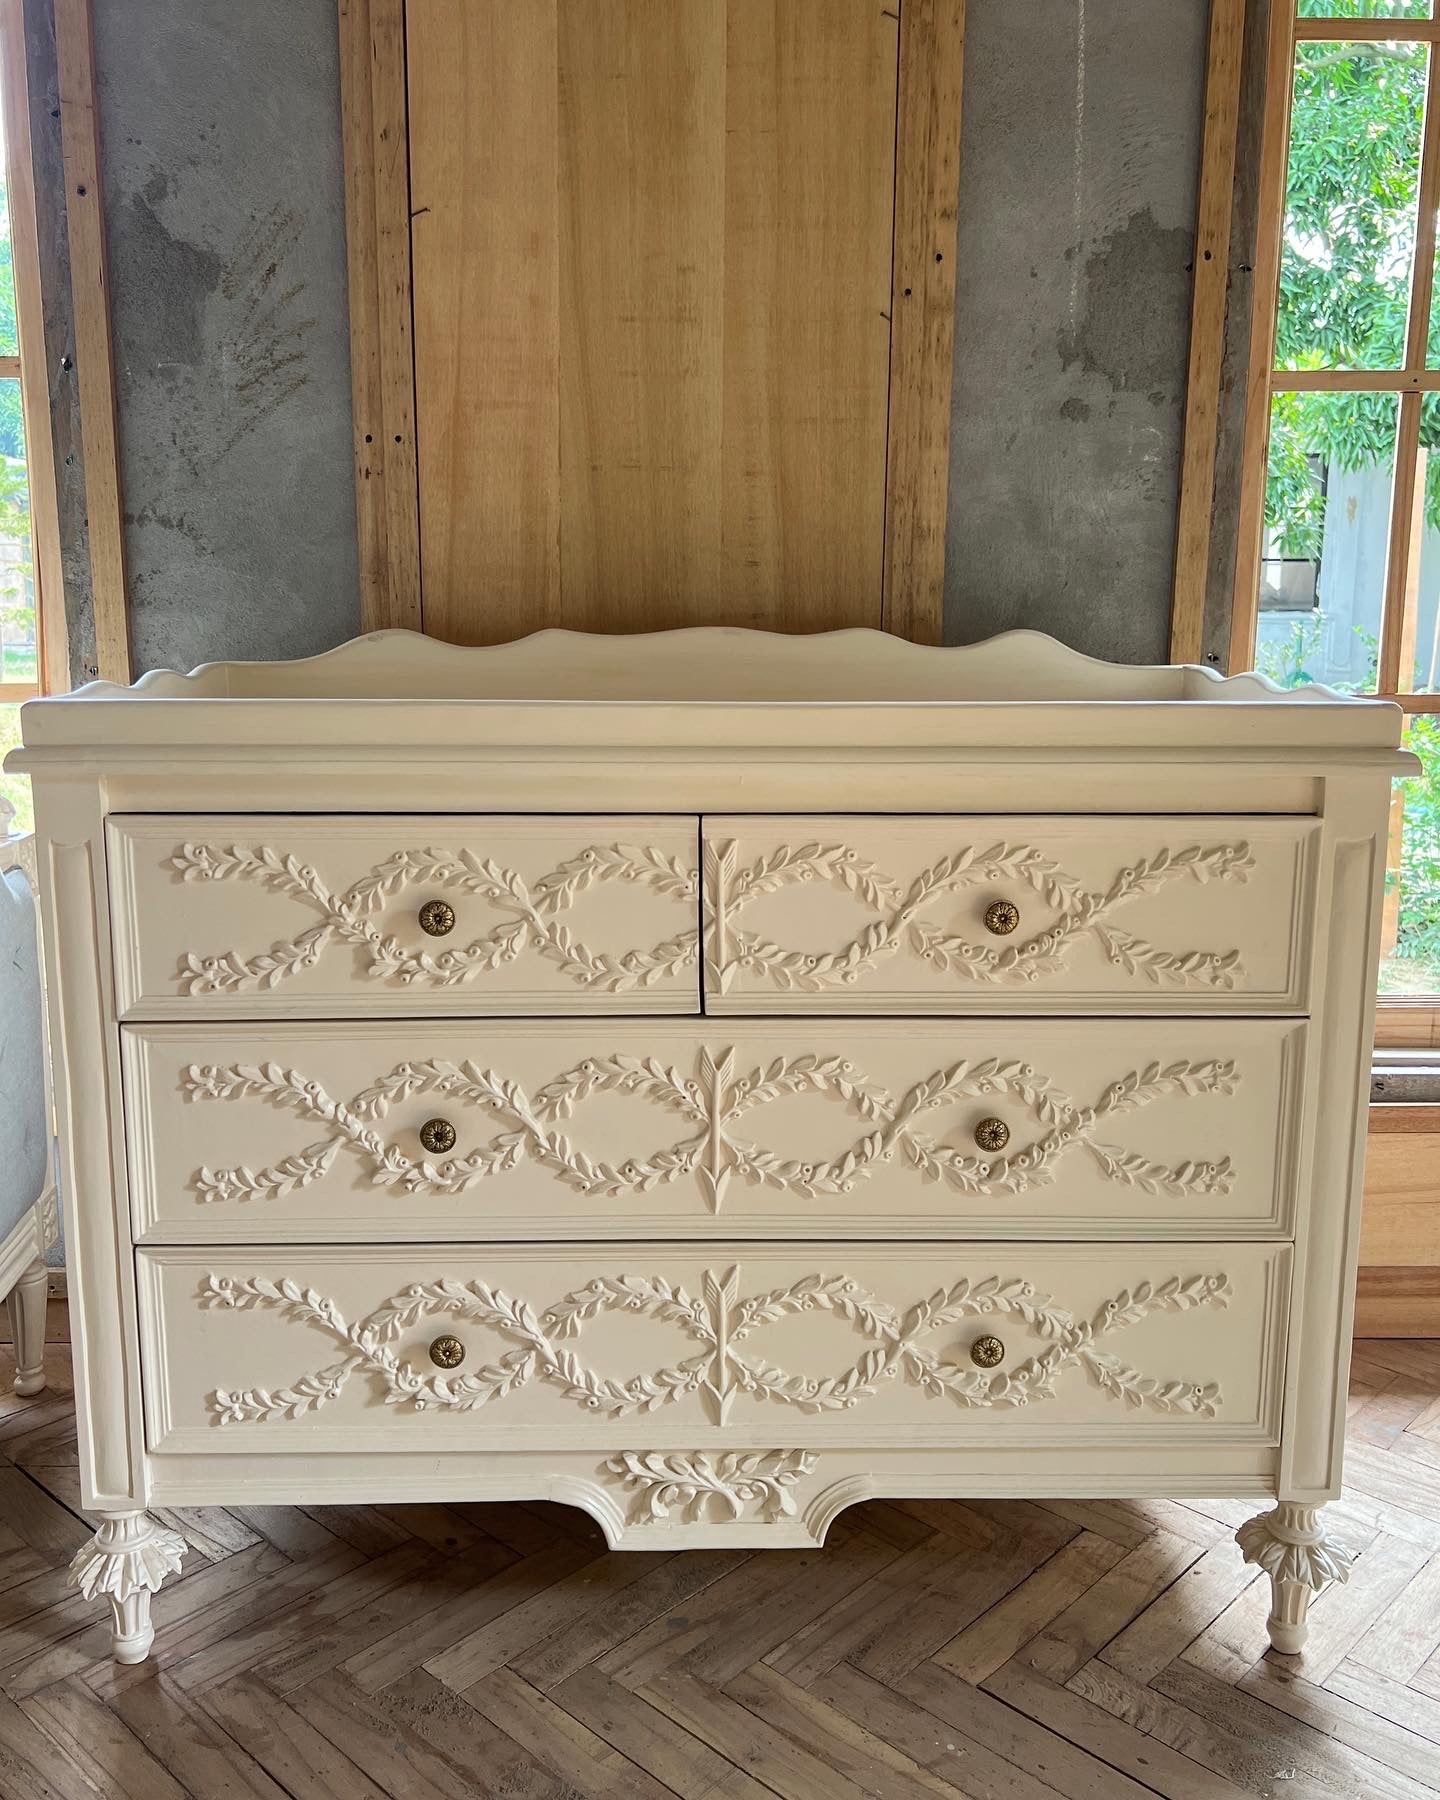 Louis XVI commode / changing table